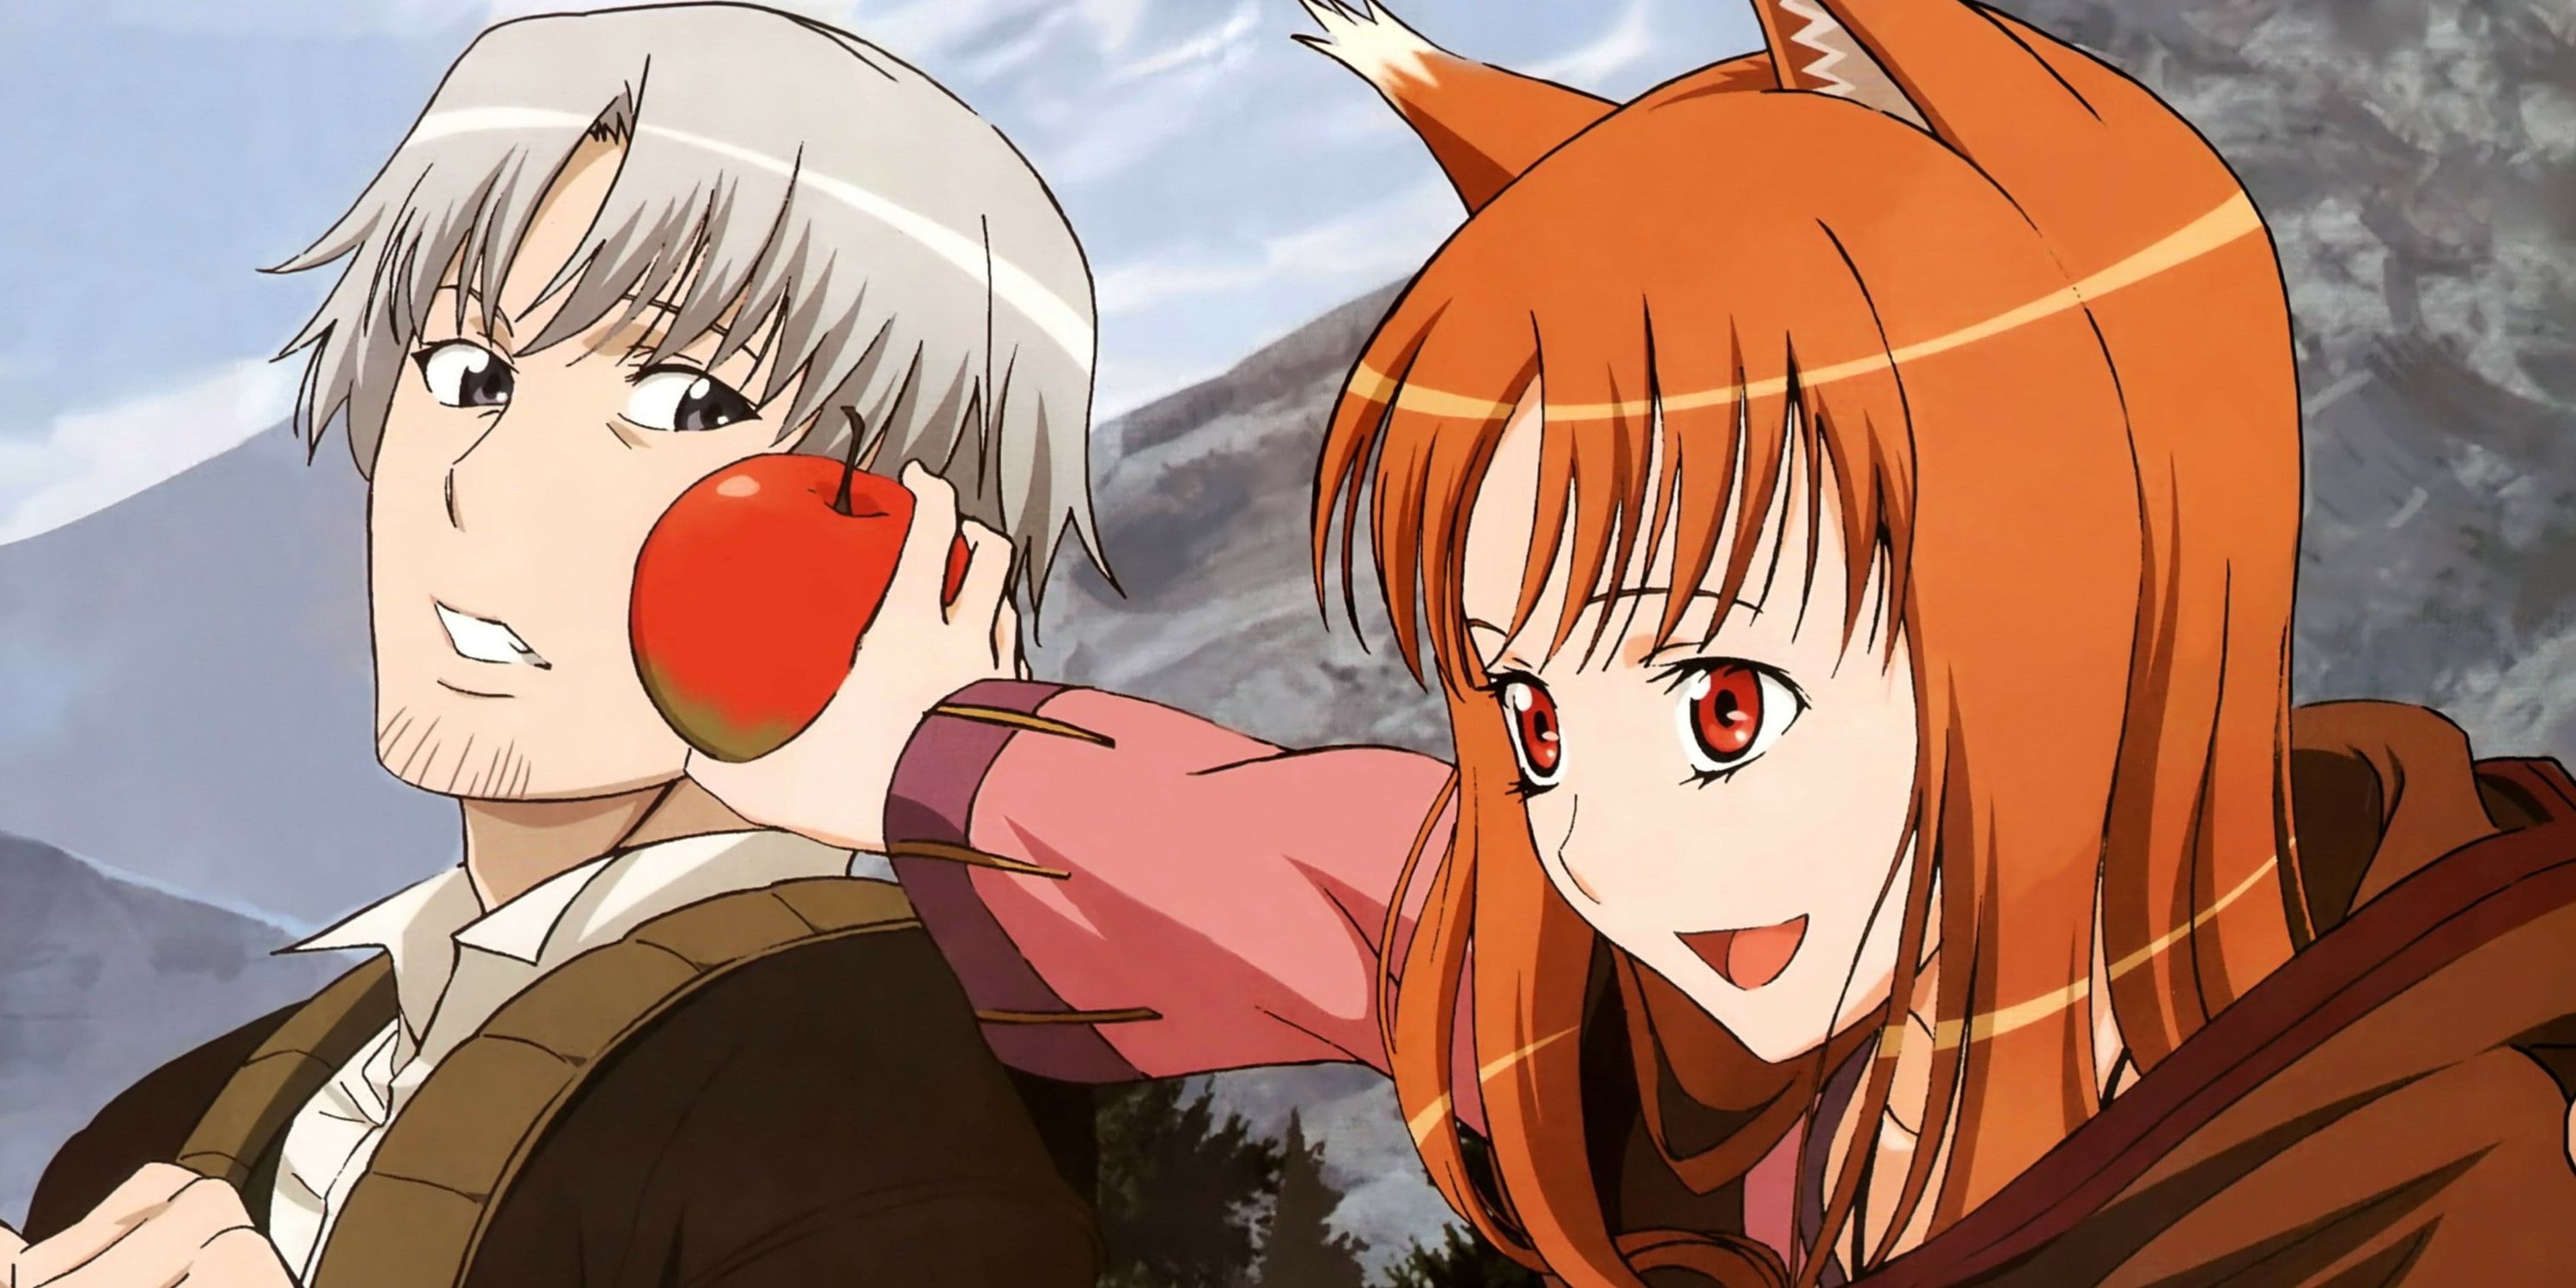 Kraft Lawrence and Holo from Spice and Wolf.